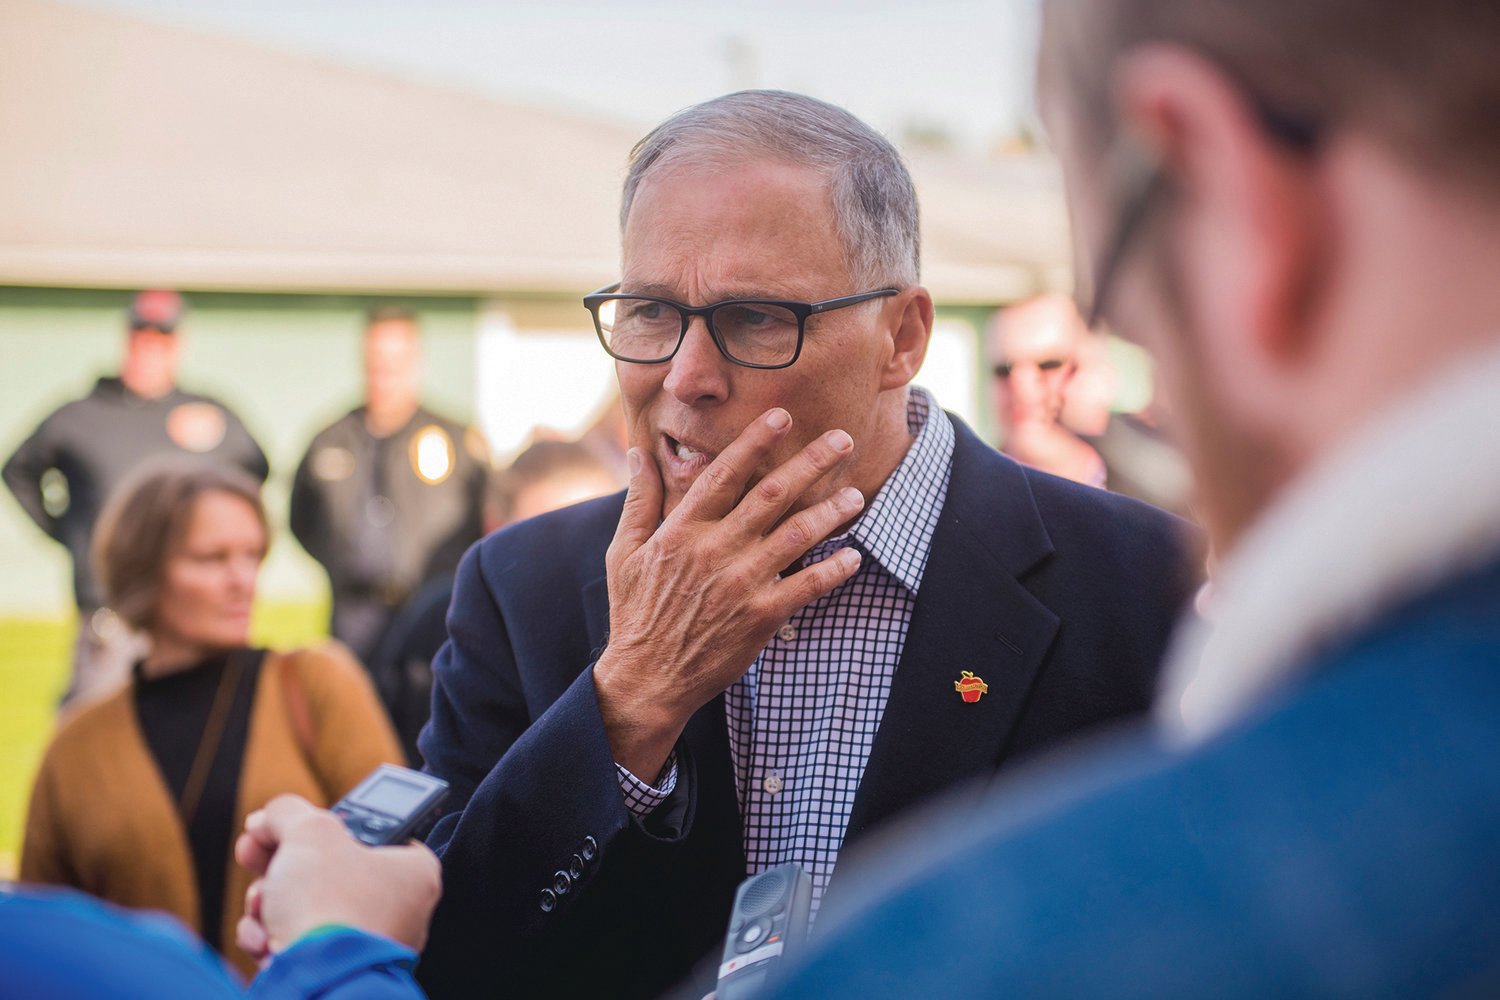 Gov. Jay Inslee talks during a press conference in November 2019 at the Southwest Washington Fairgrounds in Chehalis.